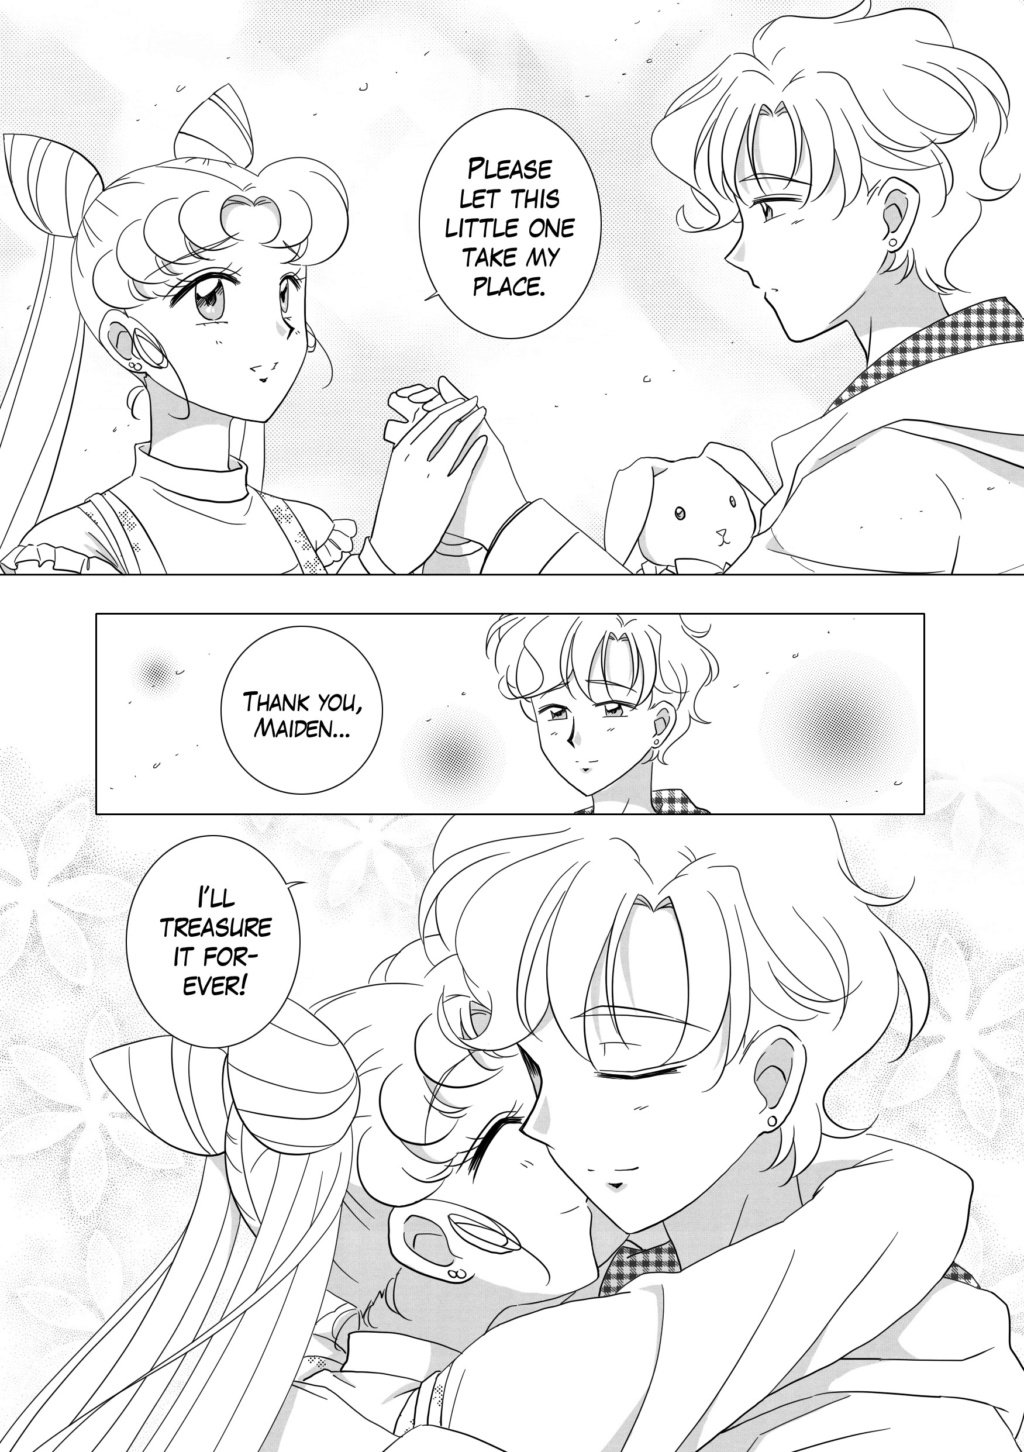 [F] My 30th century Chibi-Usa x Helios doujinshi project: UPDATED 11-25-18 - Page 19 Sbs_pg54